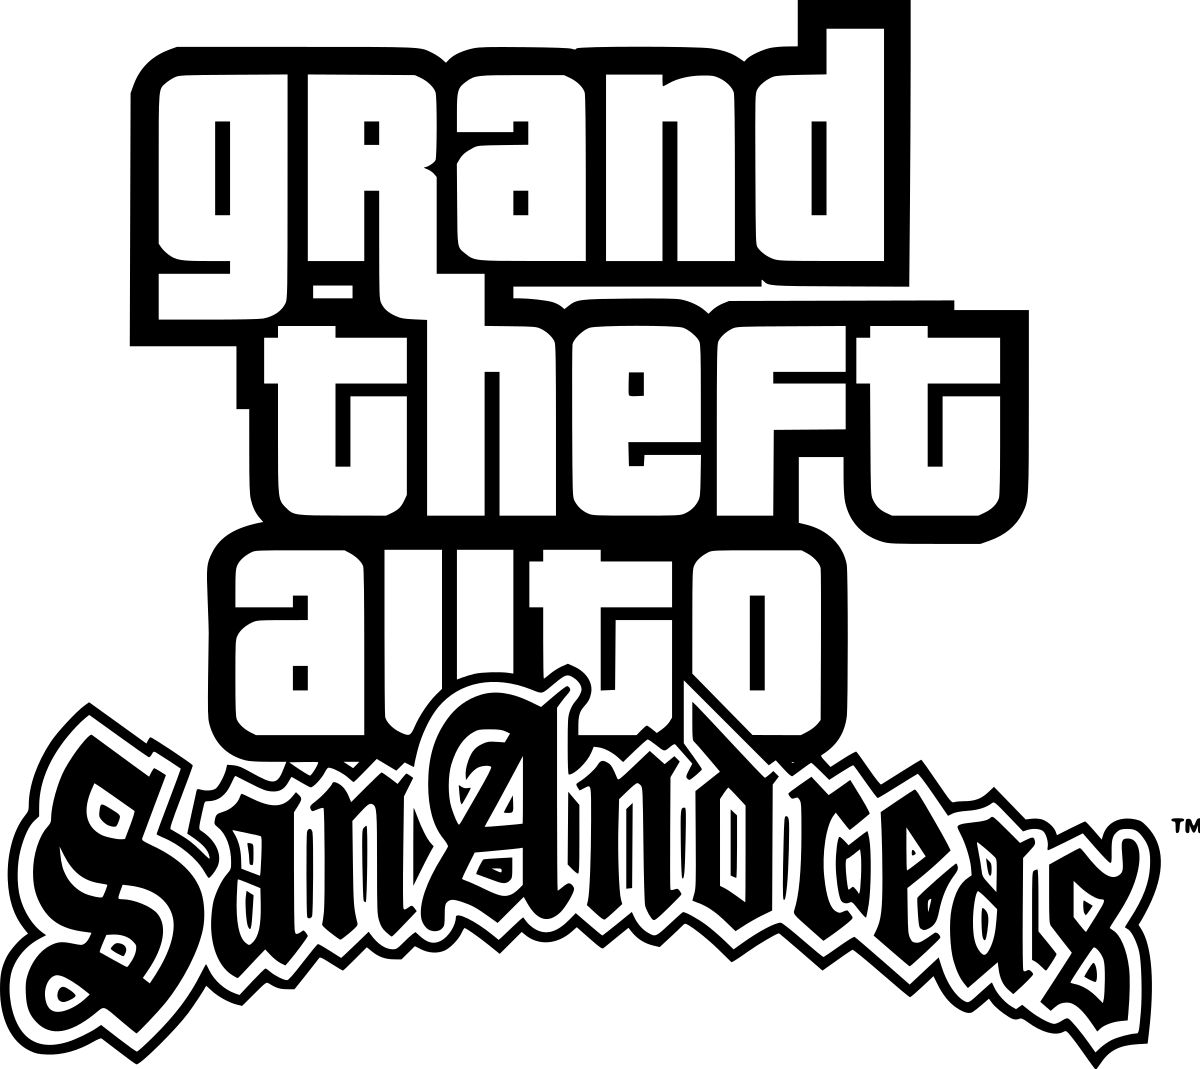 Download the Original Grand Theft Auto for Free